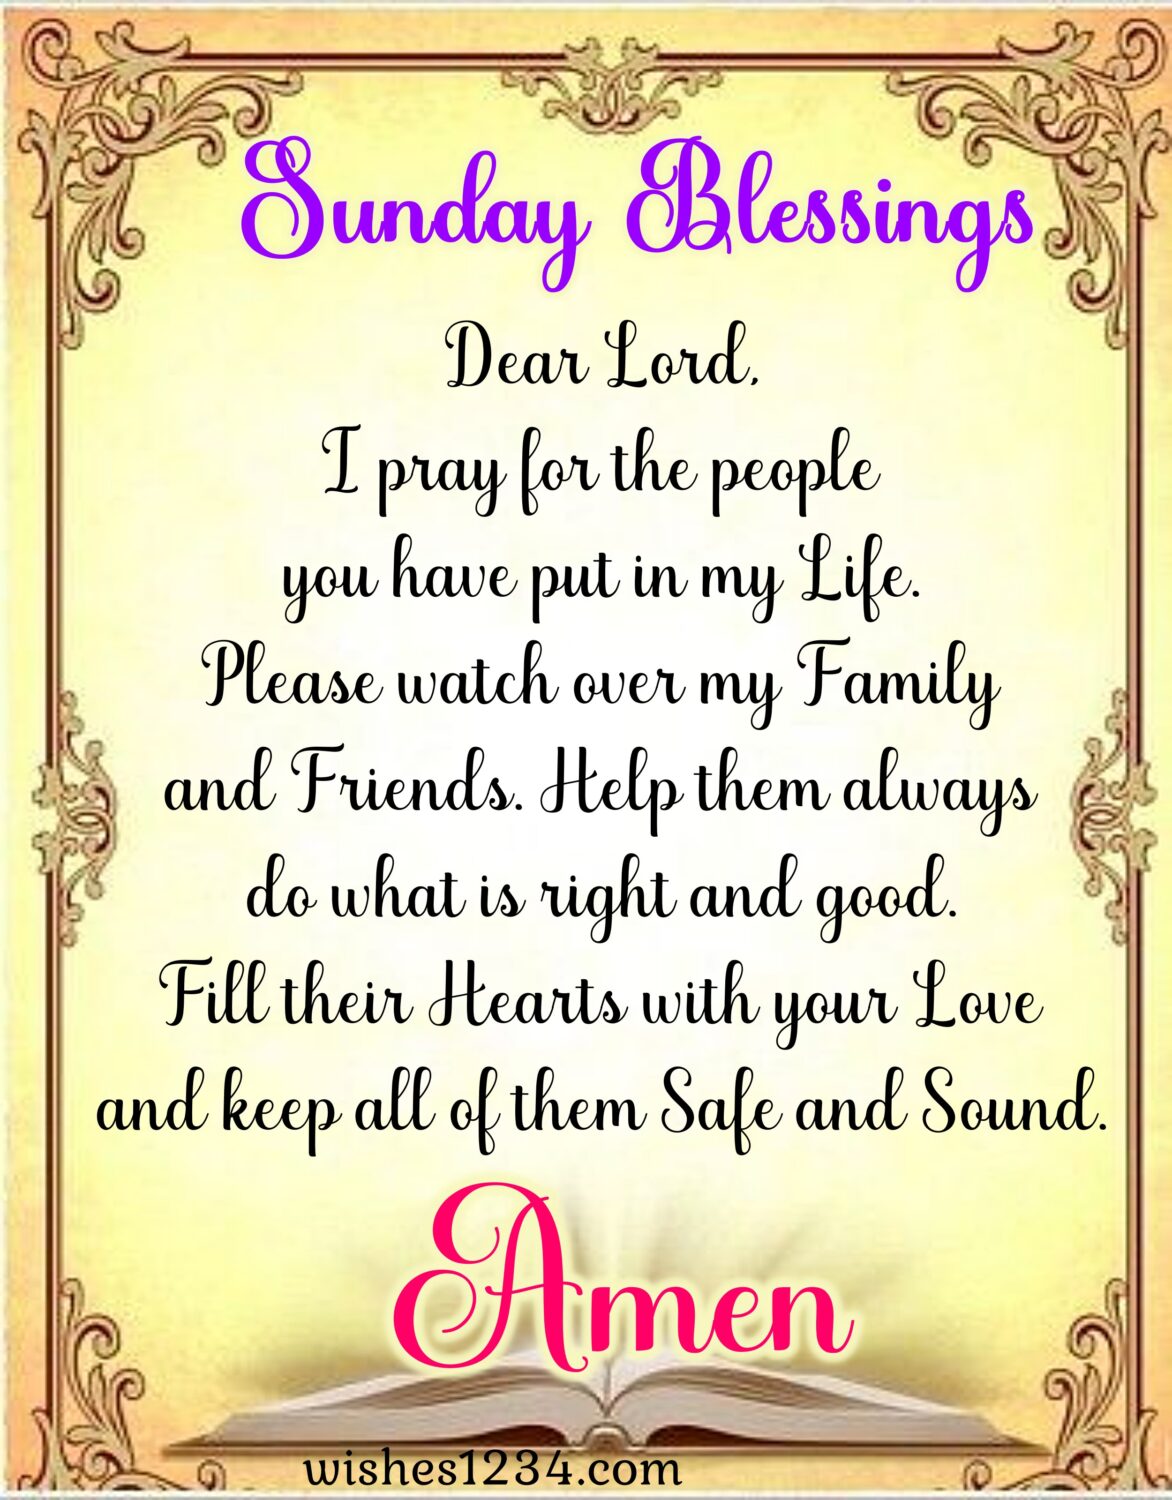 Sunday blessings with golden design border, Sunday Blessings Images.